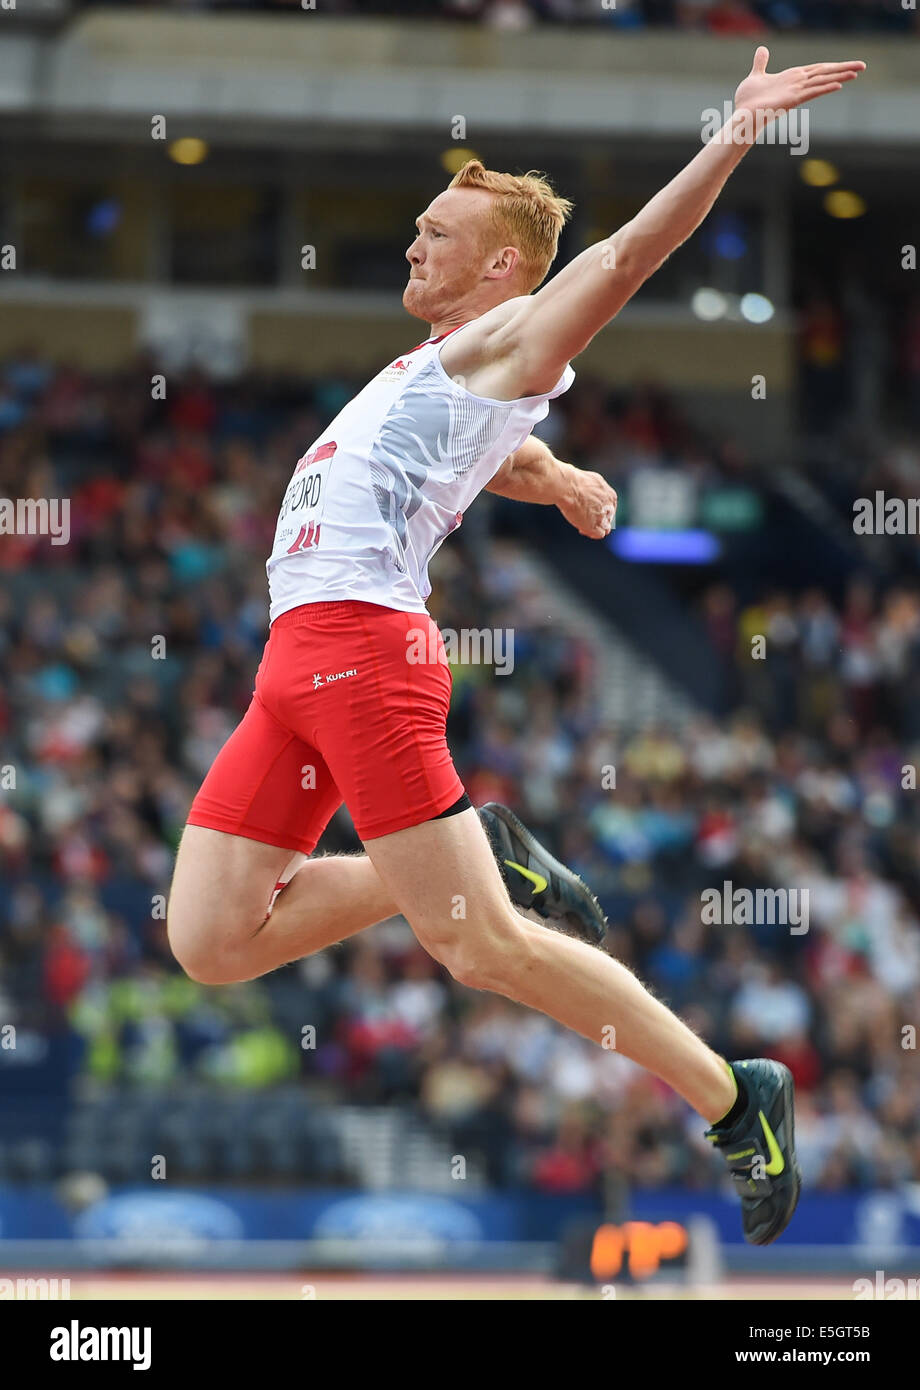 Glasgow, Scotland, UK. 30th July, 2014. Greg Rutherford of England during the mens long jump final on day 7 of the 20th Commonwealth Games at Hampden Park Athletics stadium on July 30, 2014 in Glasgow, Scotland. Credit:  Roger Sedres/Alamy Live News Stock Photo